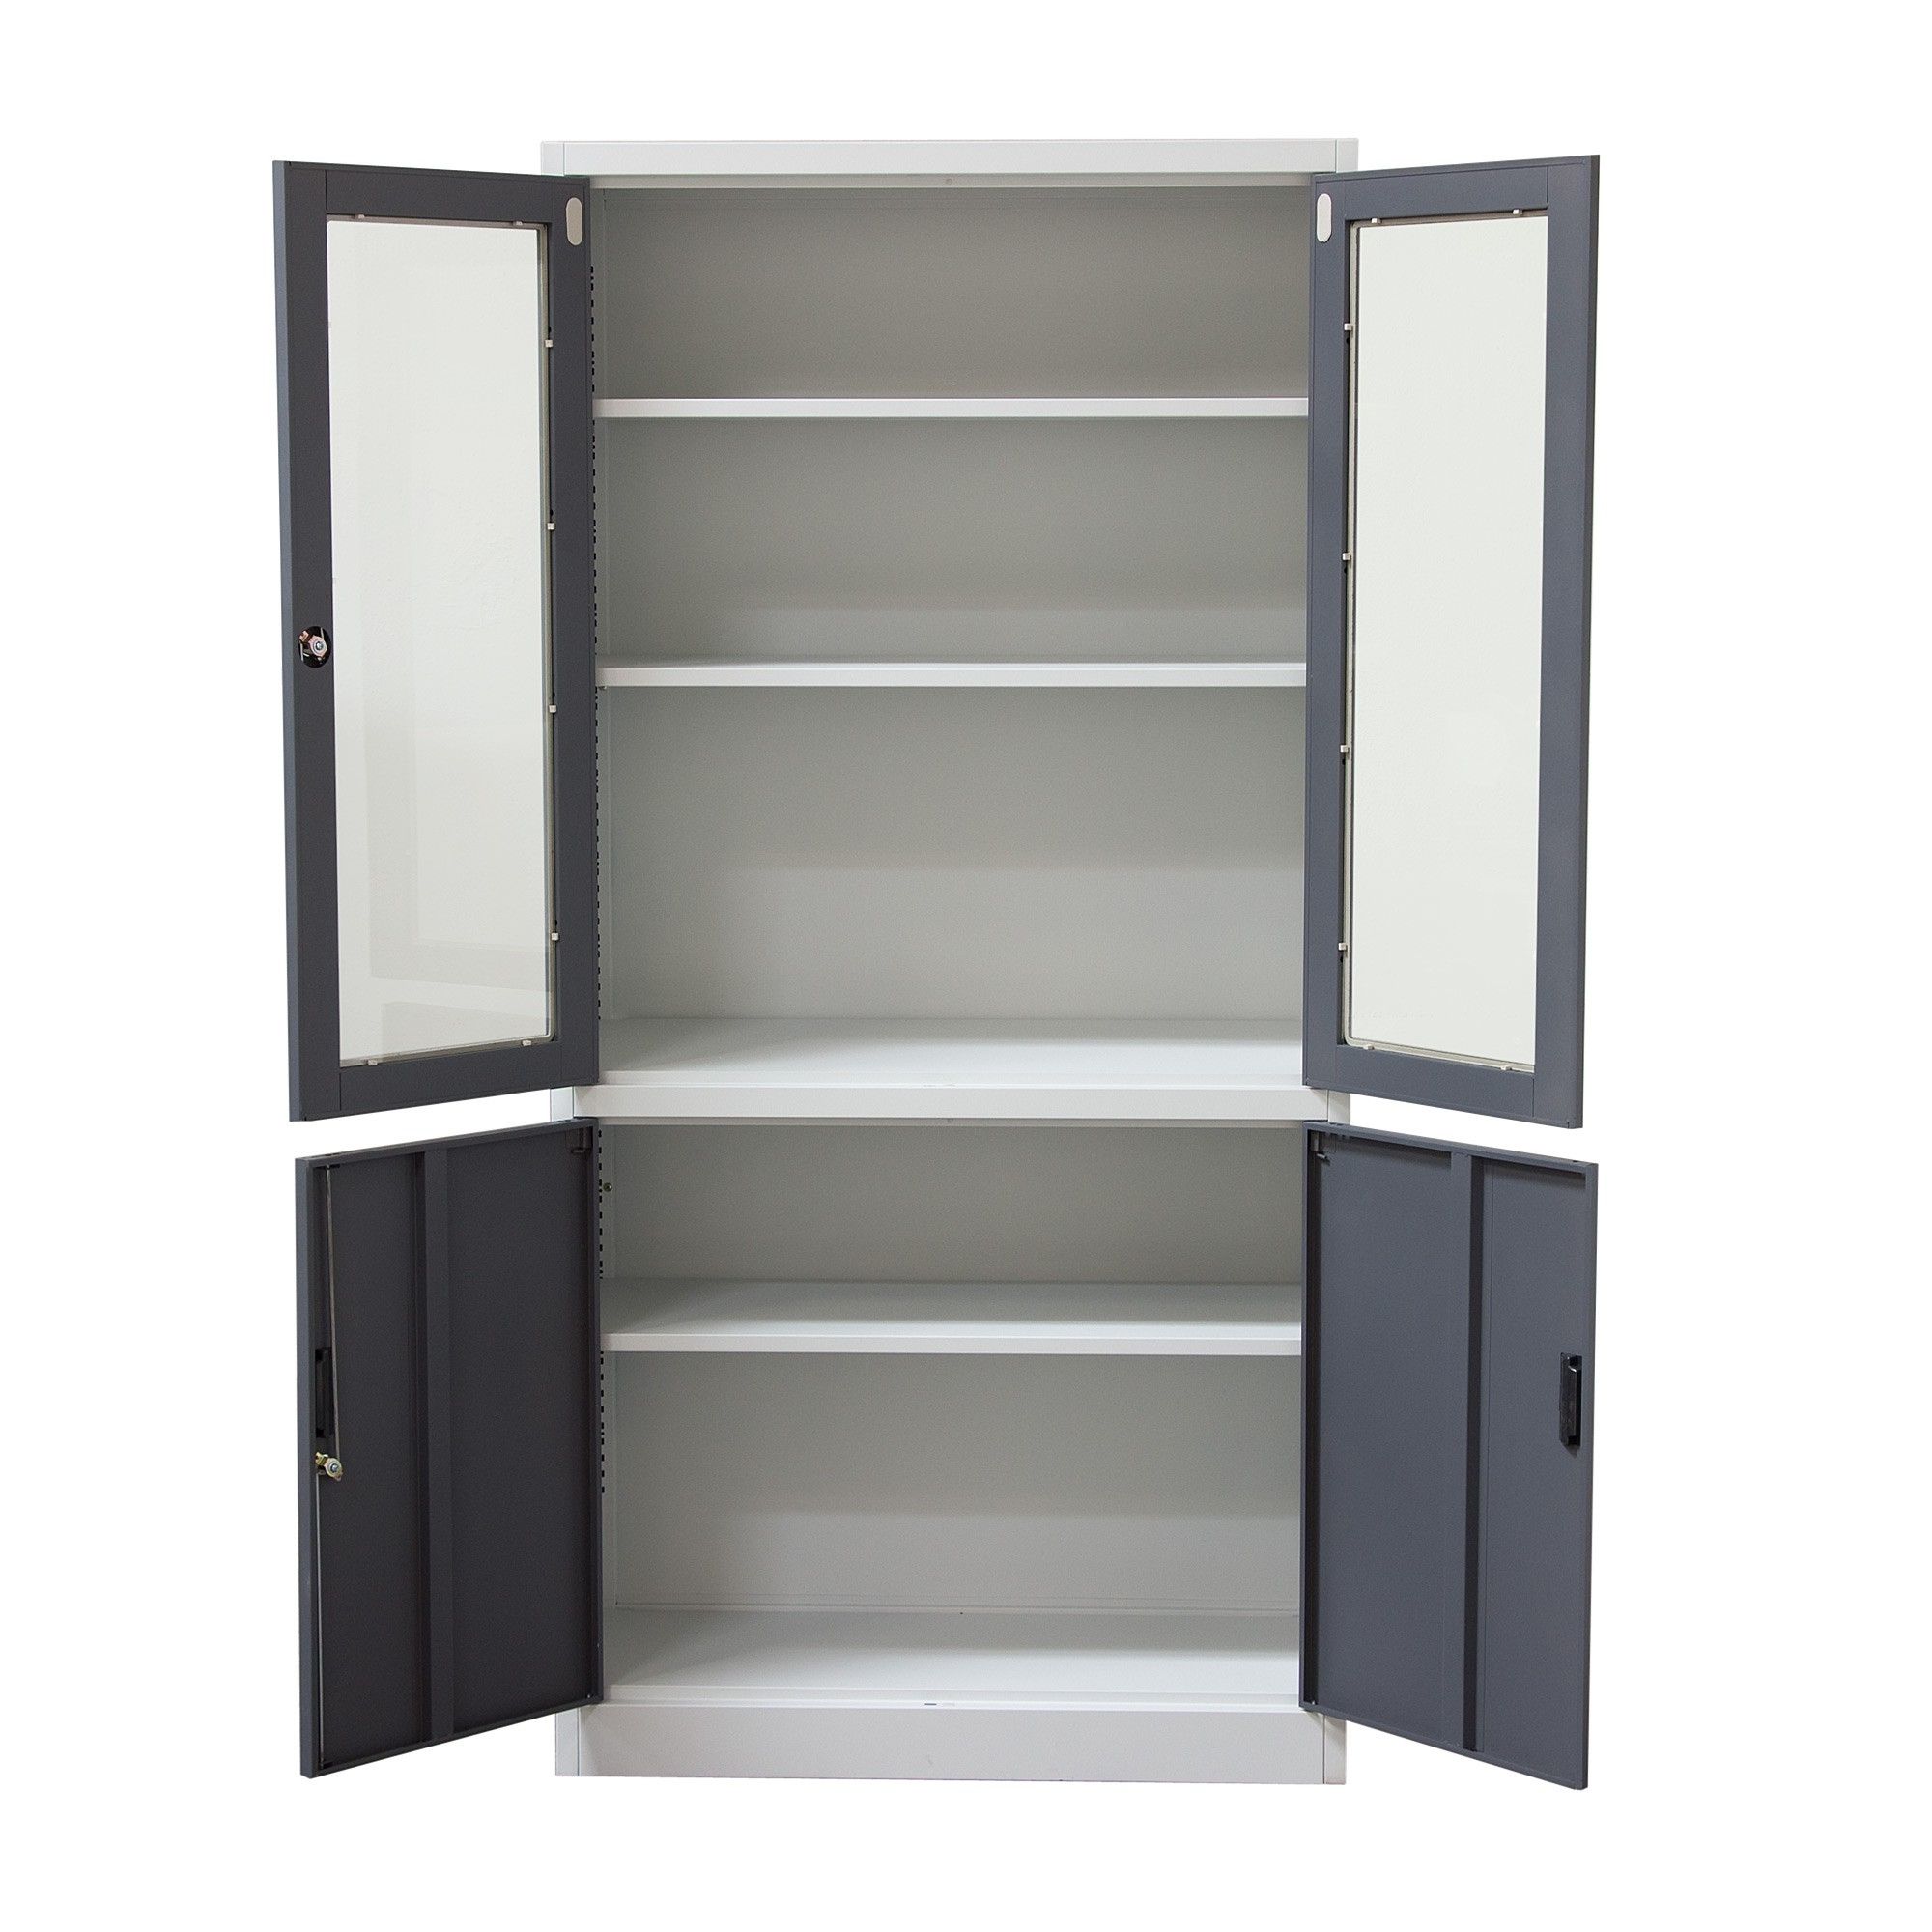 2017 Locking Bookcases Pertaining To Furniture (View 4 of 15)